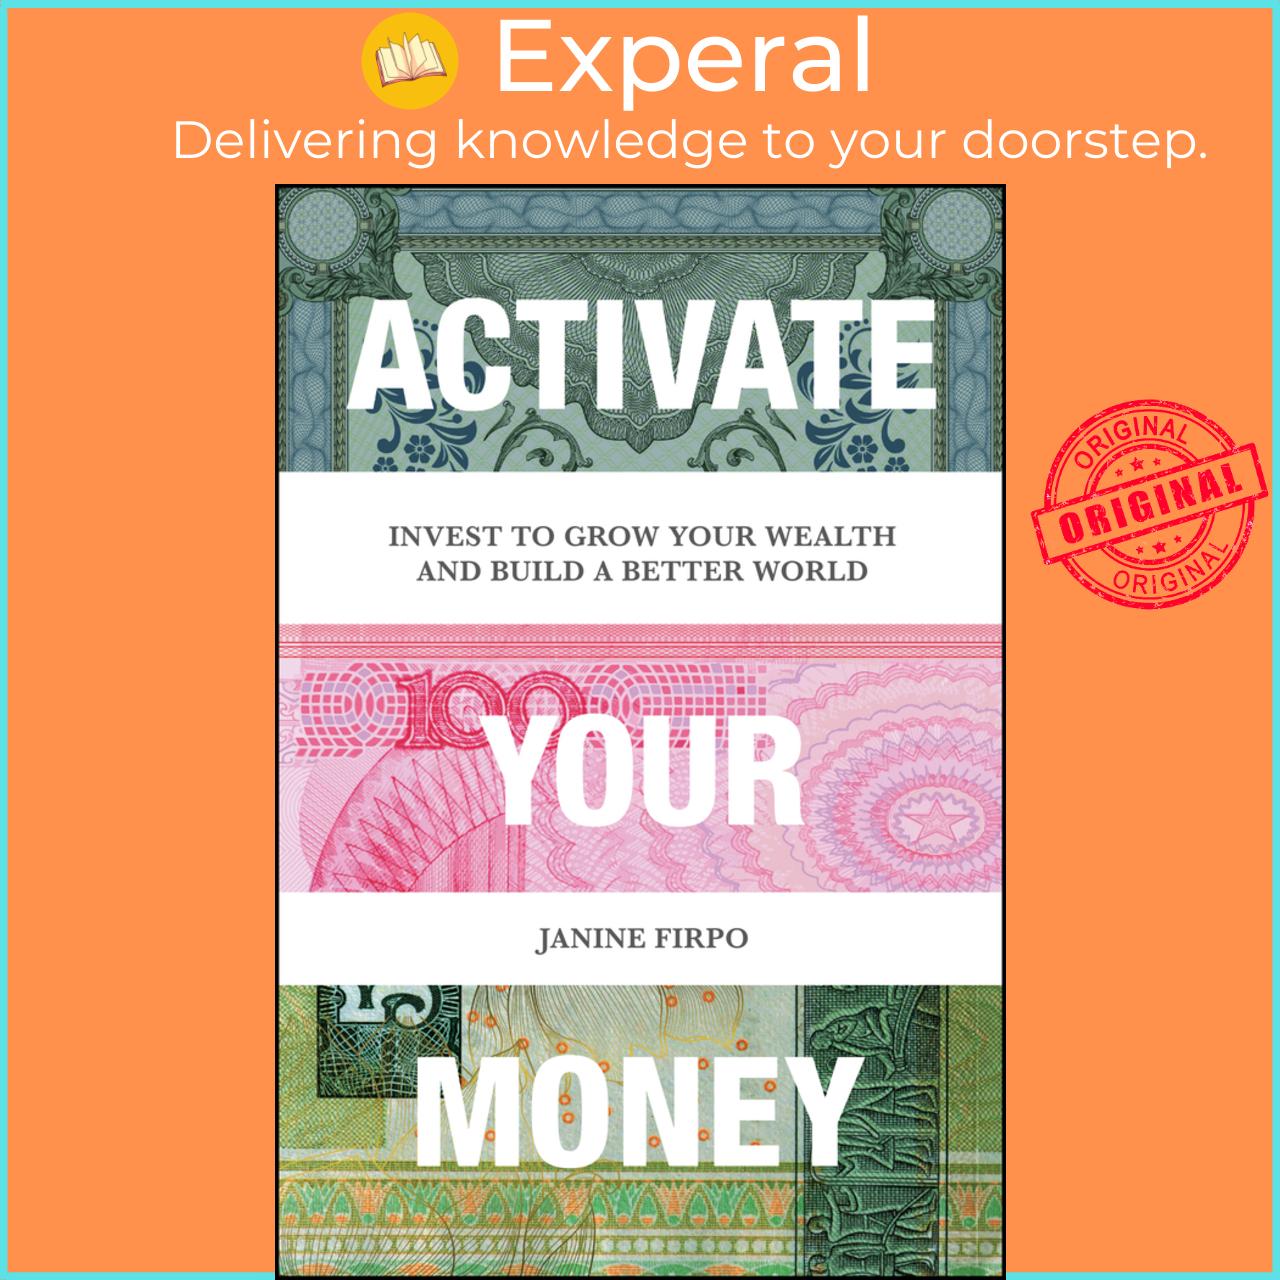 Sách - Activate Your Money - Invest to Grow Your Wealth and Build a Better World by Janine Firpo (US edition, paperback)